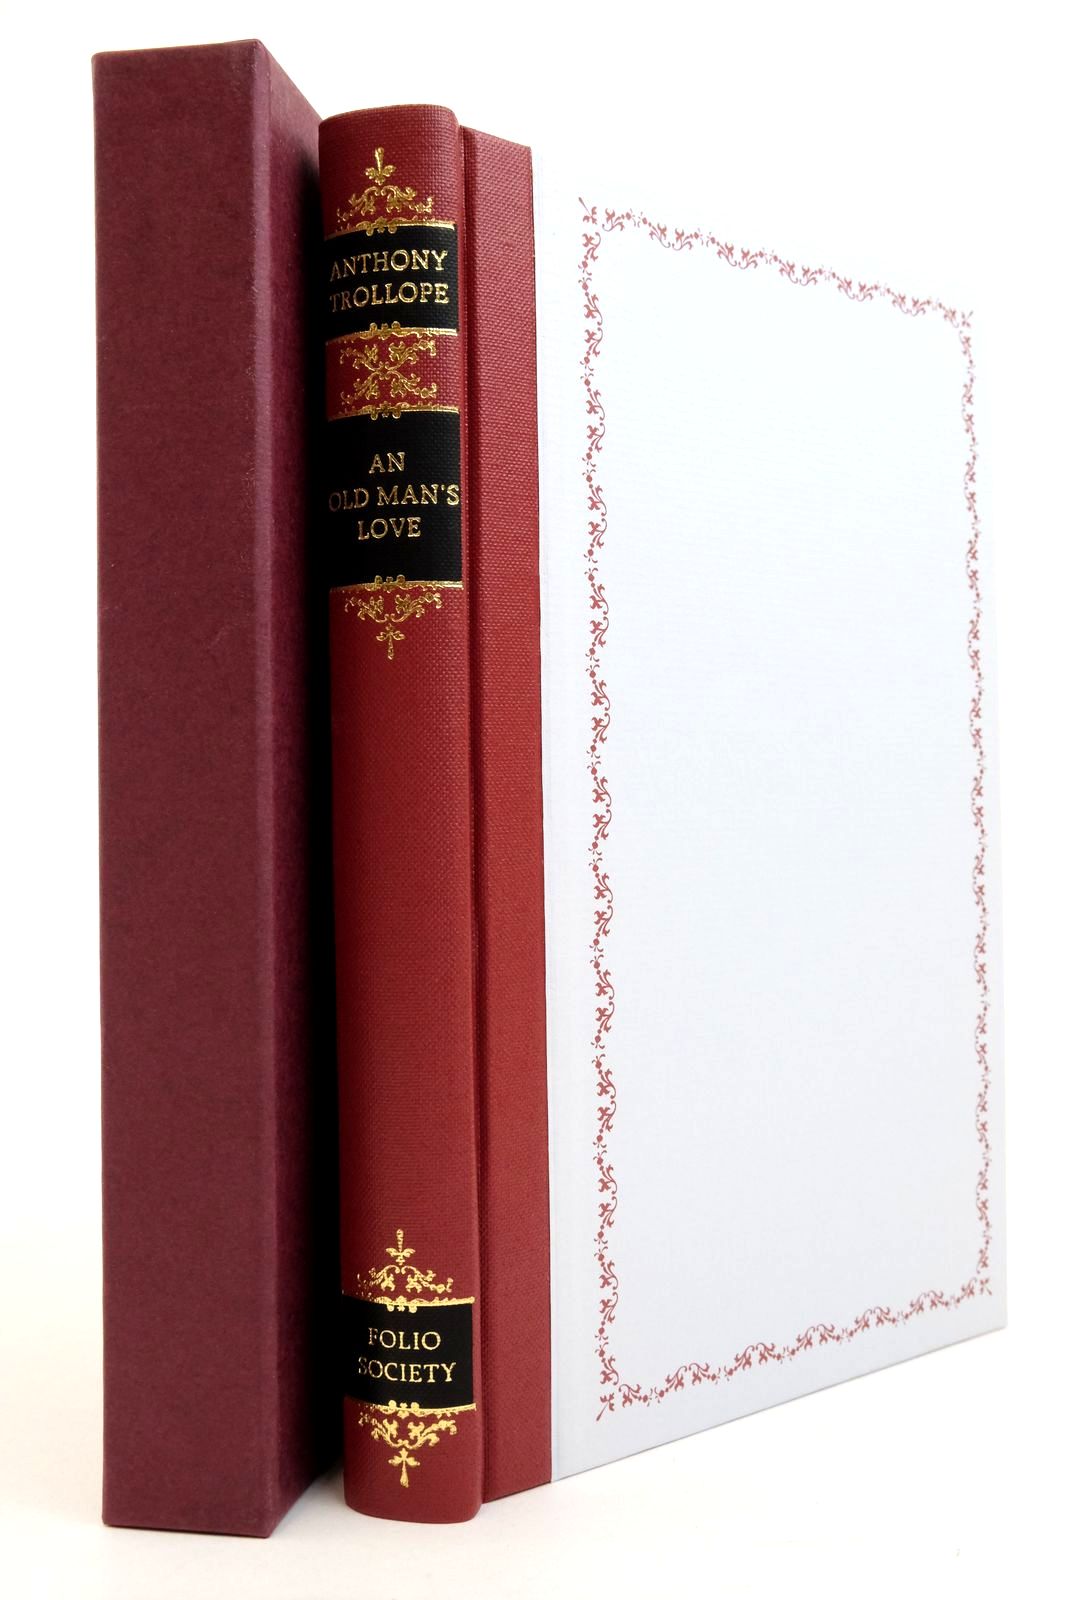 Photo of AN OLD MAN'S LOVE written by Trollope, Anthony
Skilton, David illustrated by Waters, Rod published by Folio Society (STOCK CODE: 2138233)  for sale by Stella & Rose's Books